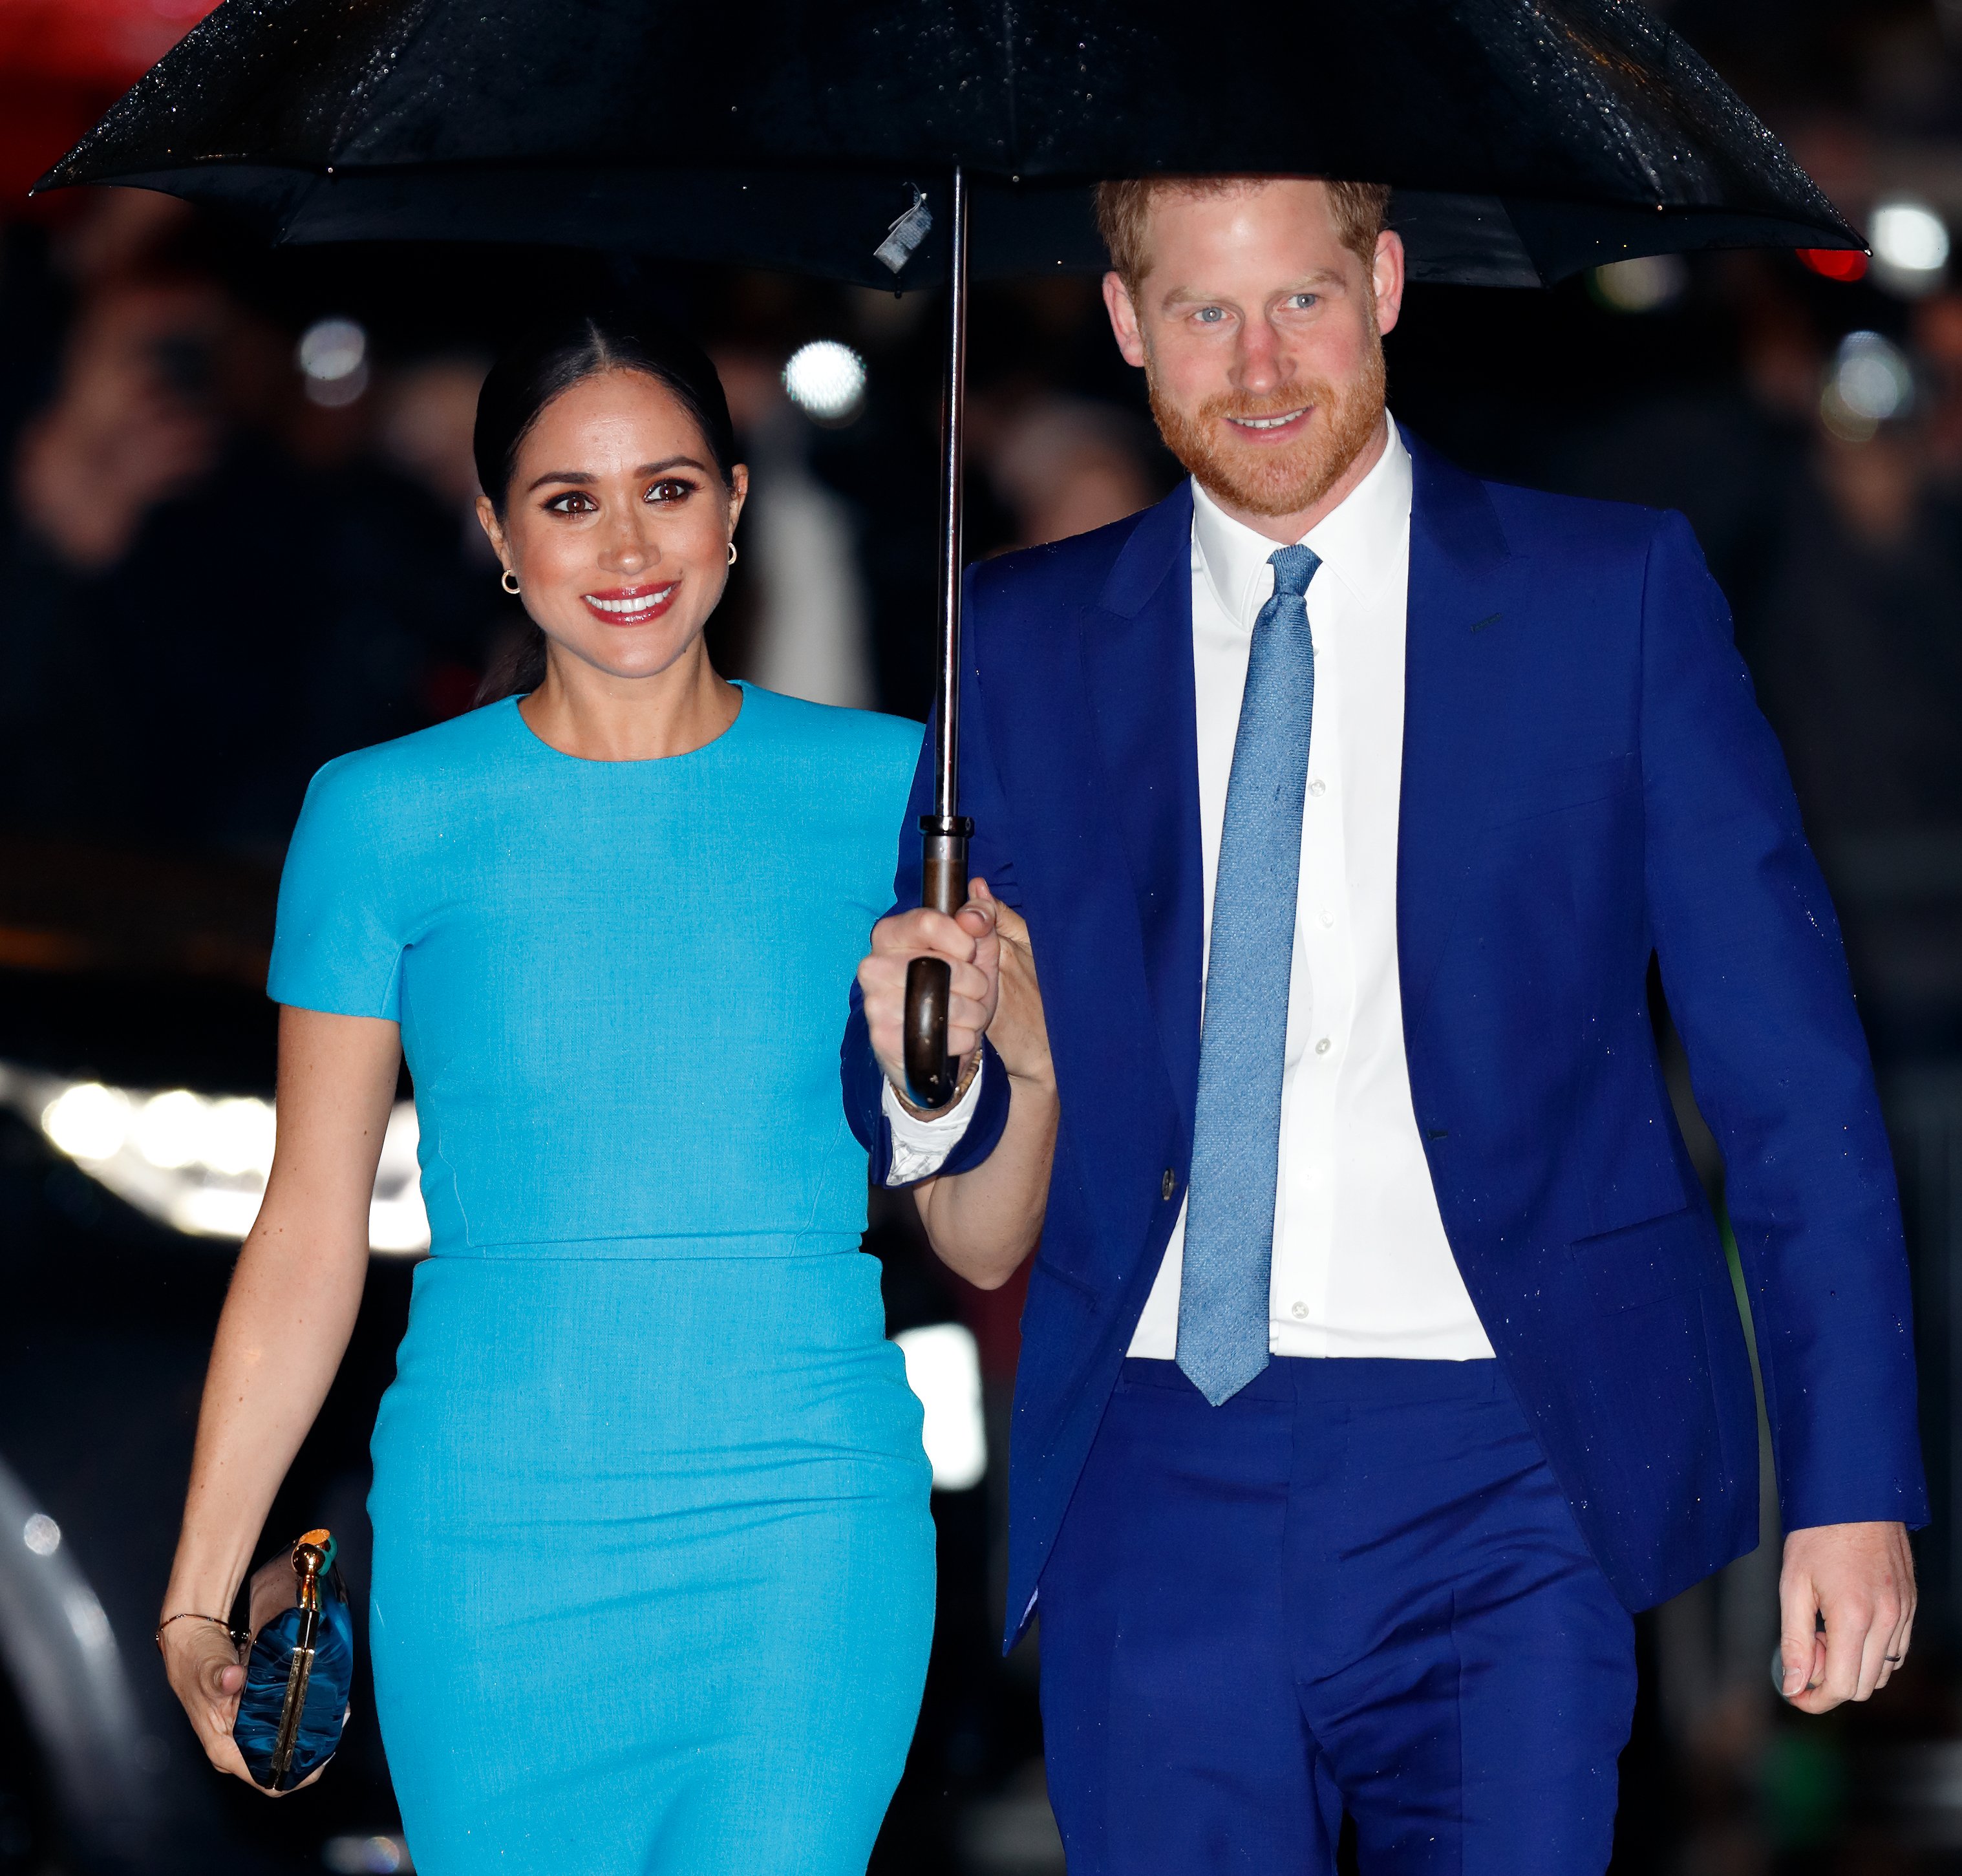 Meghan and Prince Harry attend The Endeavour Fund Awards at Mansion House on March 5, 2020, in London, England. | Source: Getty Images